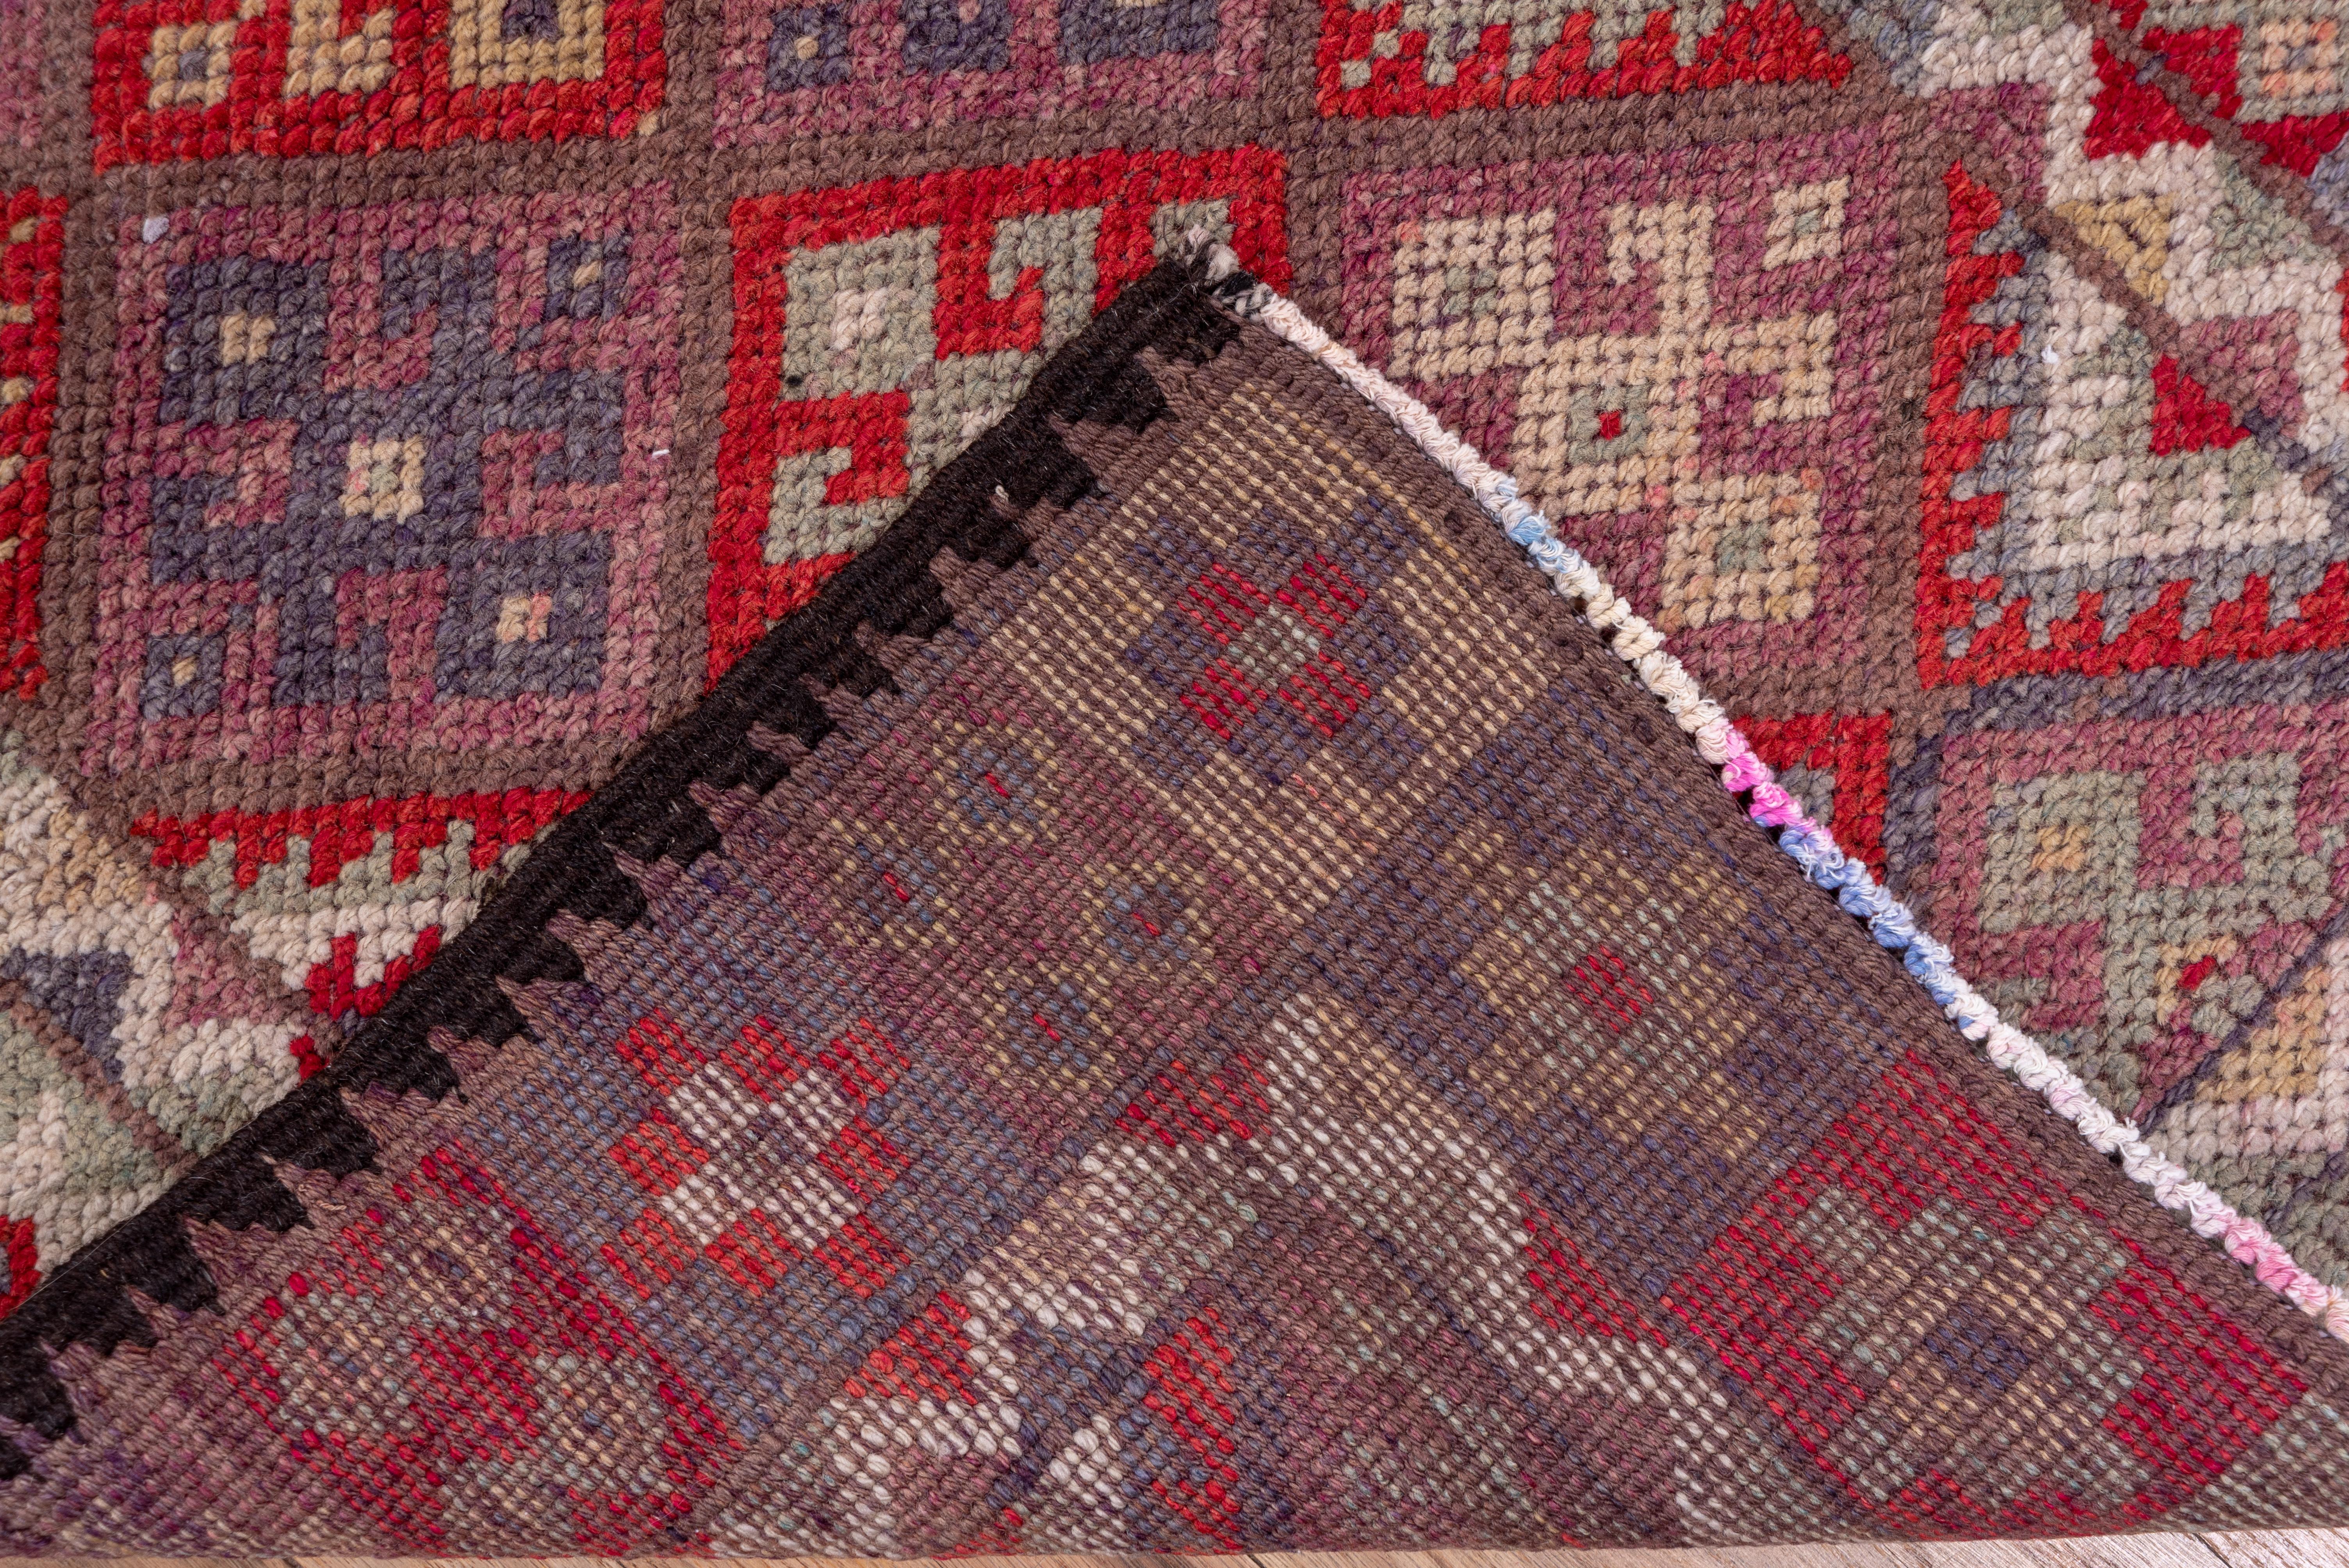 This relatively modern, good condition, large knot runner takes its colorful diamond pattern from Kurdish Jaffi bags and rugs. The wide palette includes teal, straw, light blue, red-brown, ivory and buff. The border features squares with various